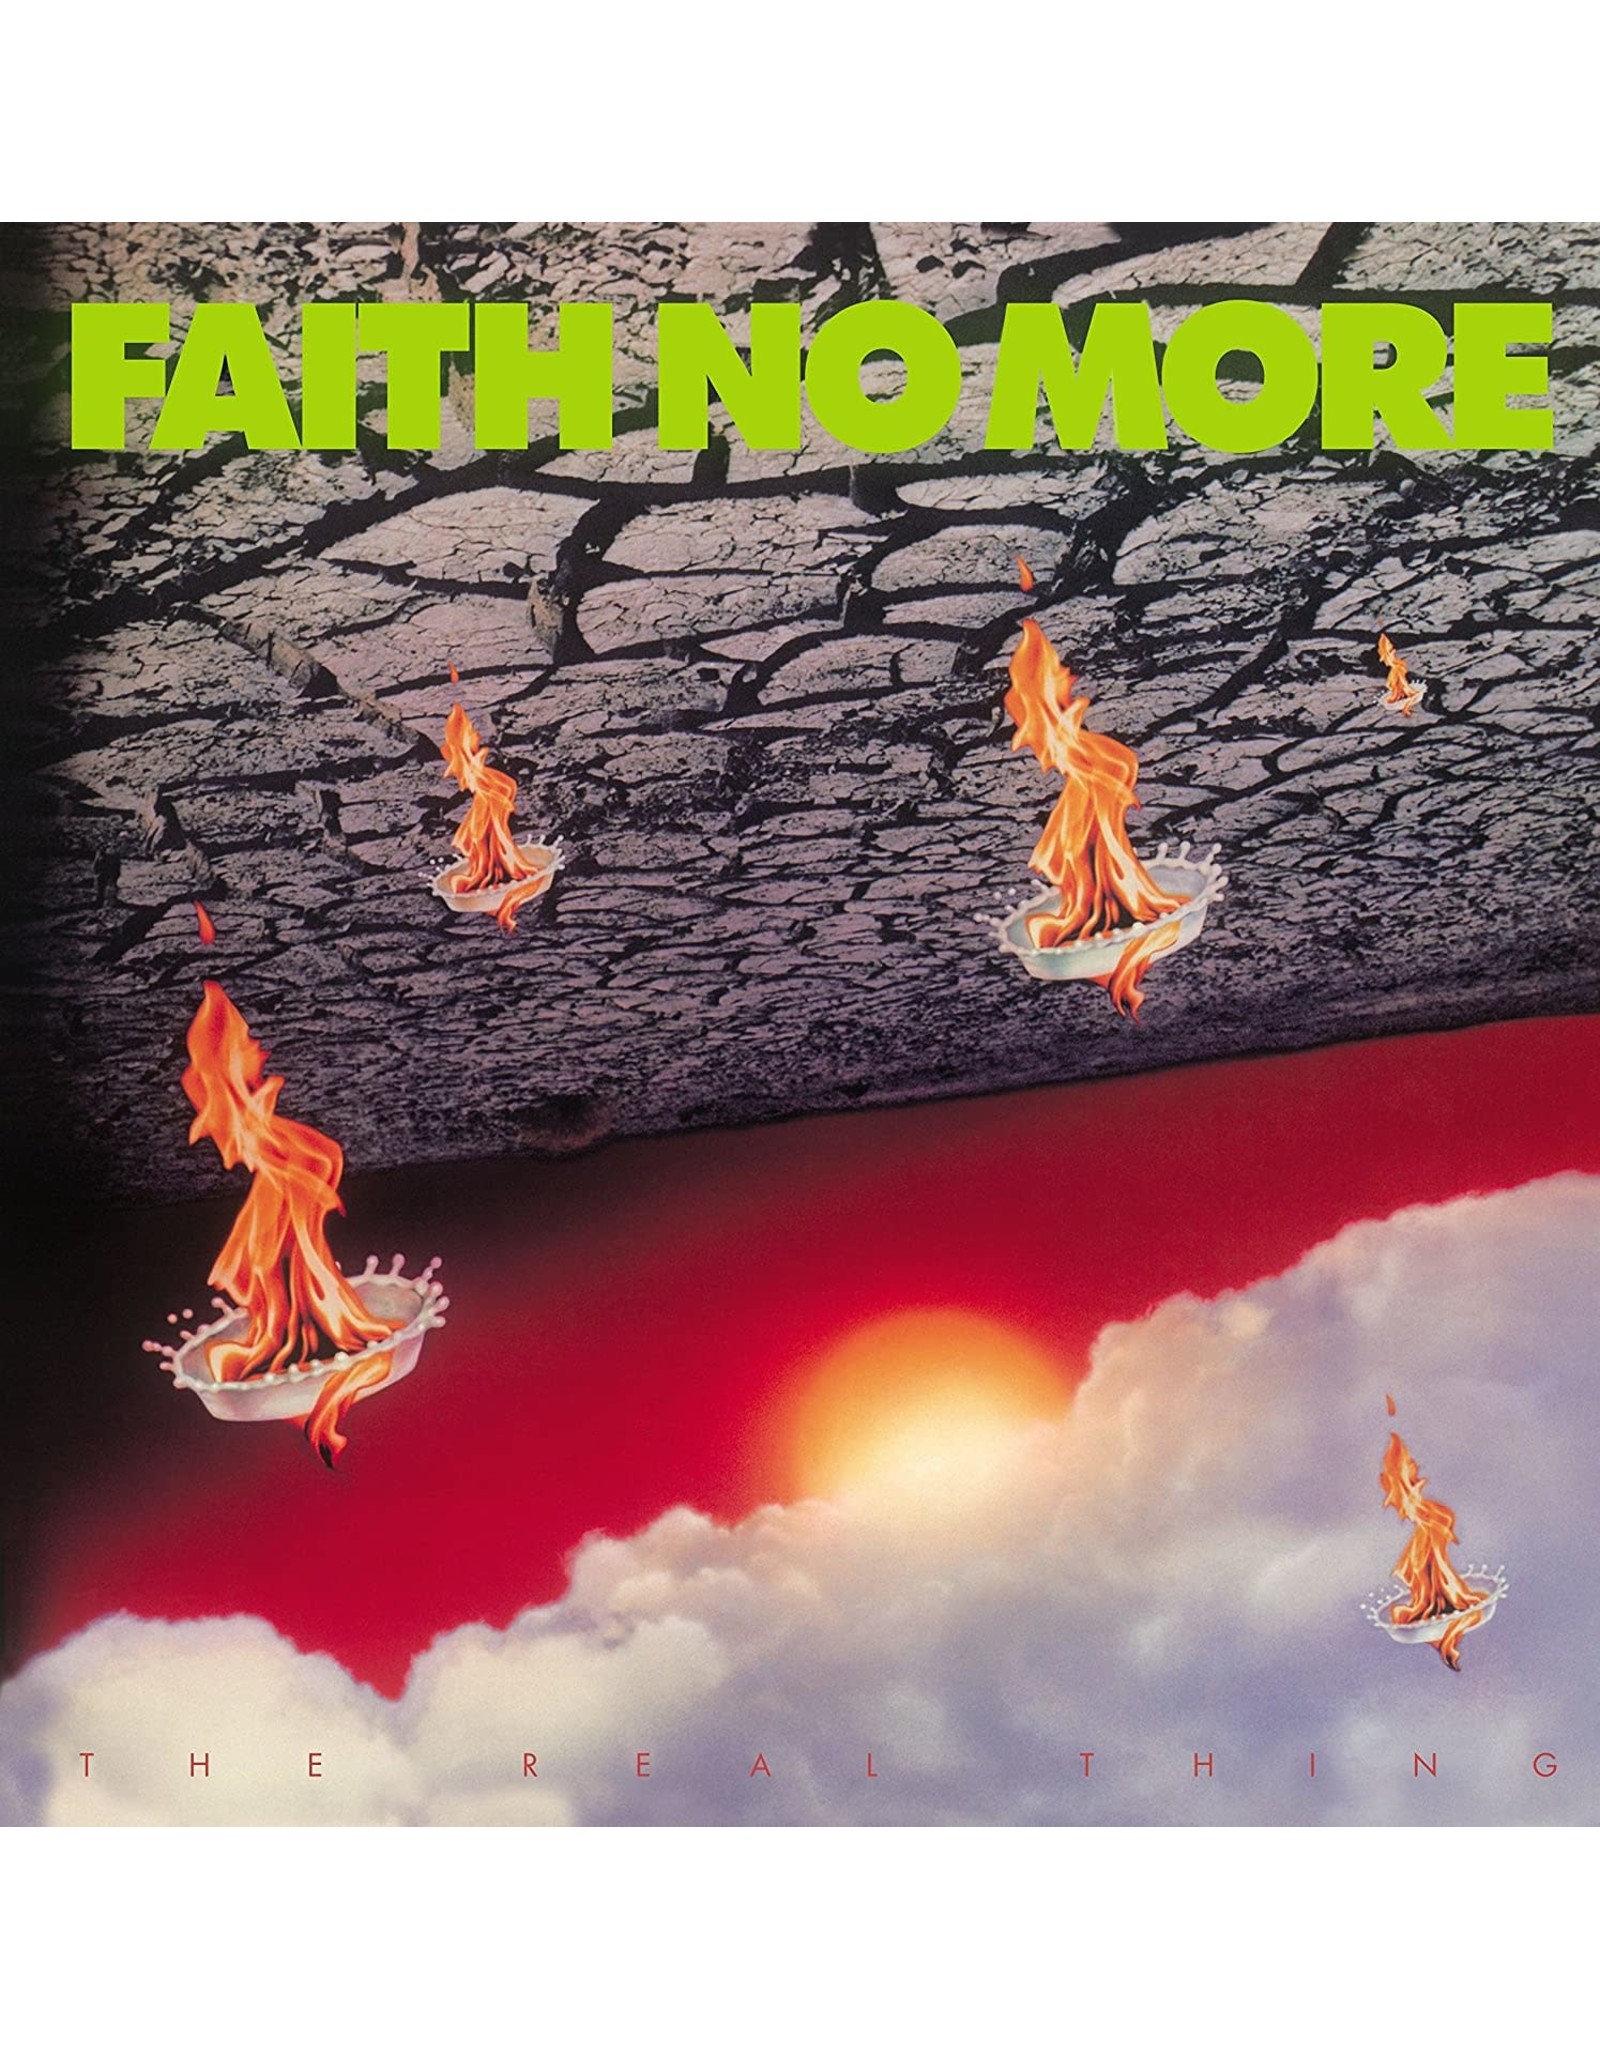 Faith No More - The Real Thing (Exclusive Yellow Vinyl)